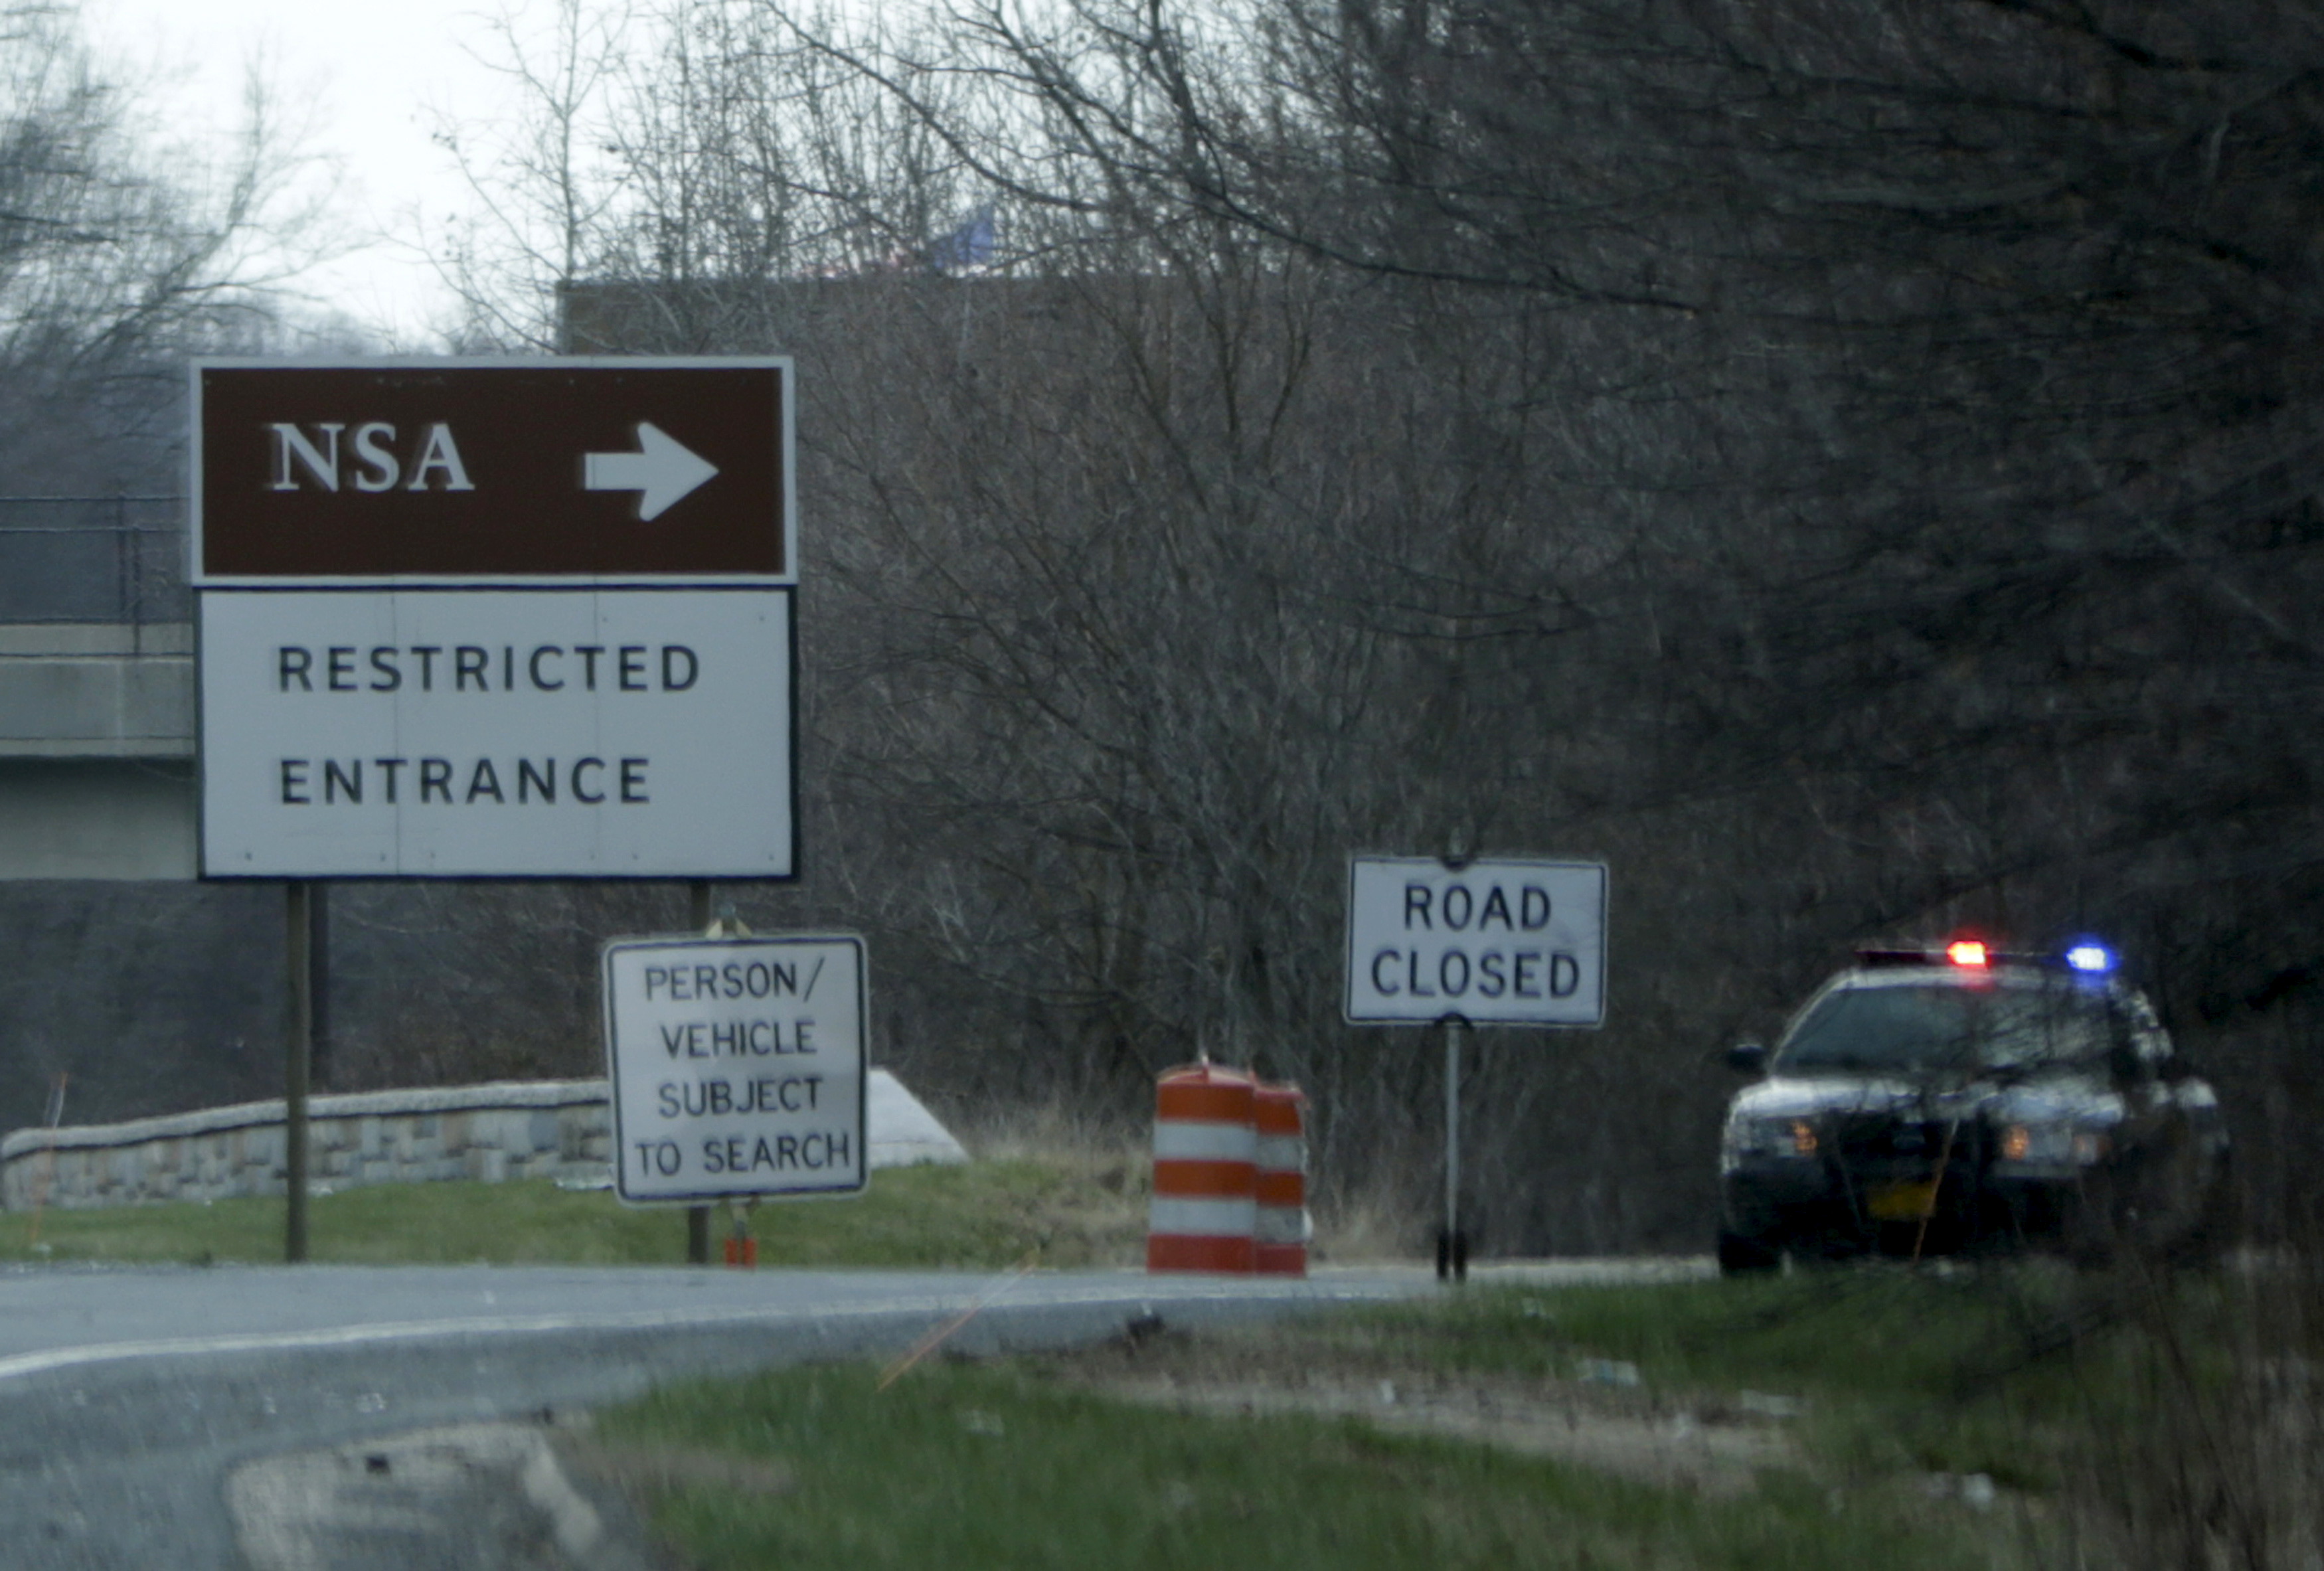 Police car guards entrance to NSA facility in Maryland